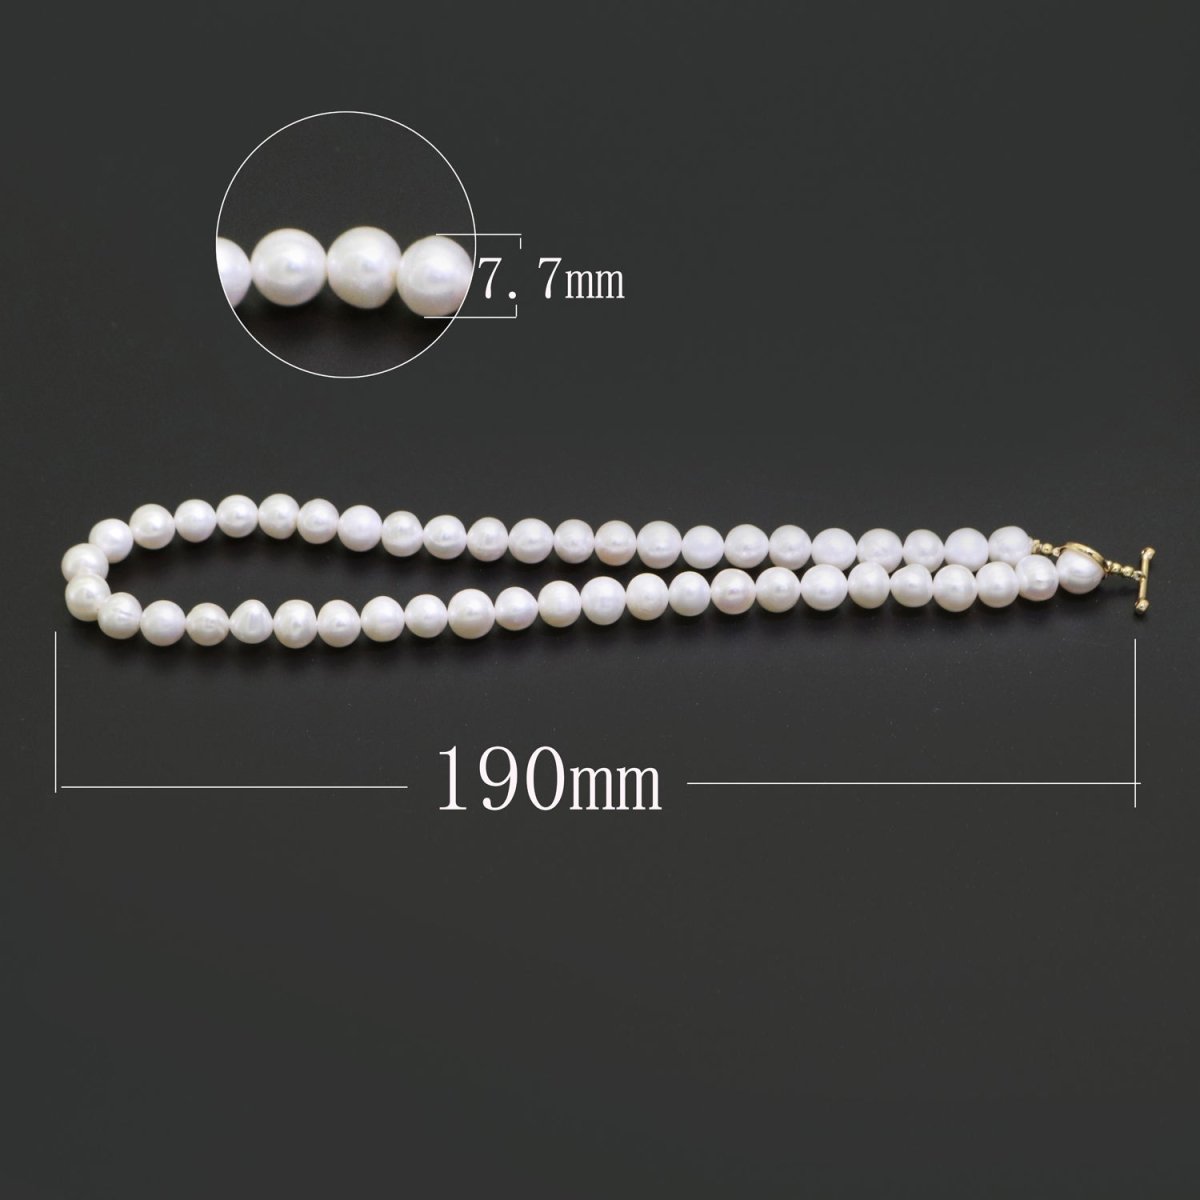 Classic Pearl Choker Necklace, White Bridal Choker Necklace With Toggle Clasp Gold Filled | WA-264 Clearance Pricing - DLUXCA